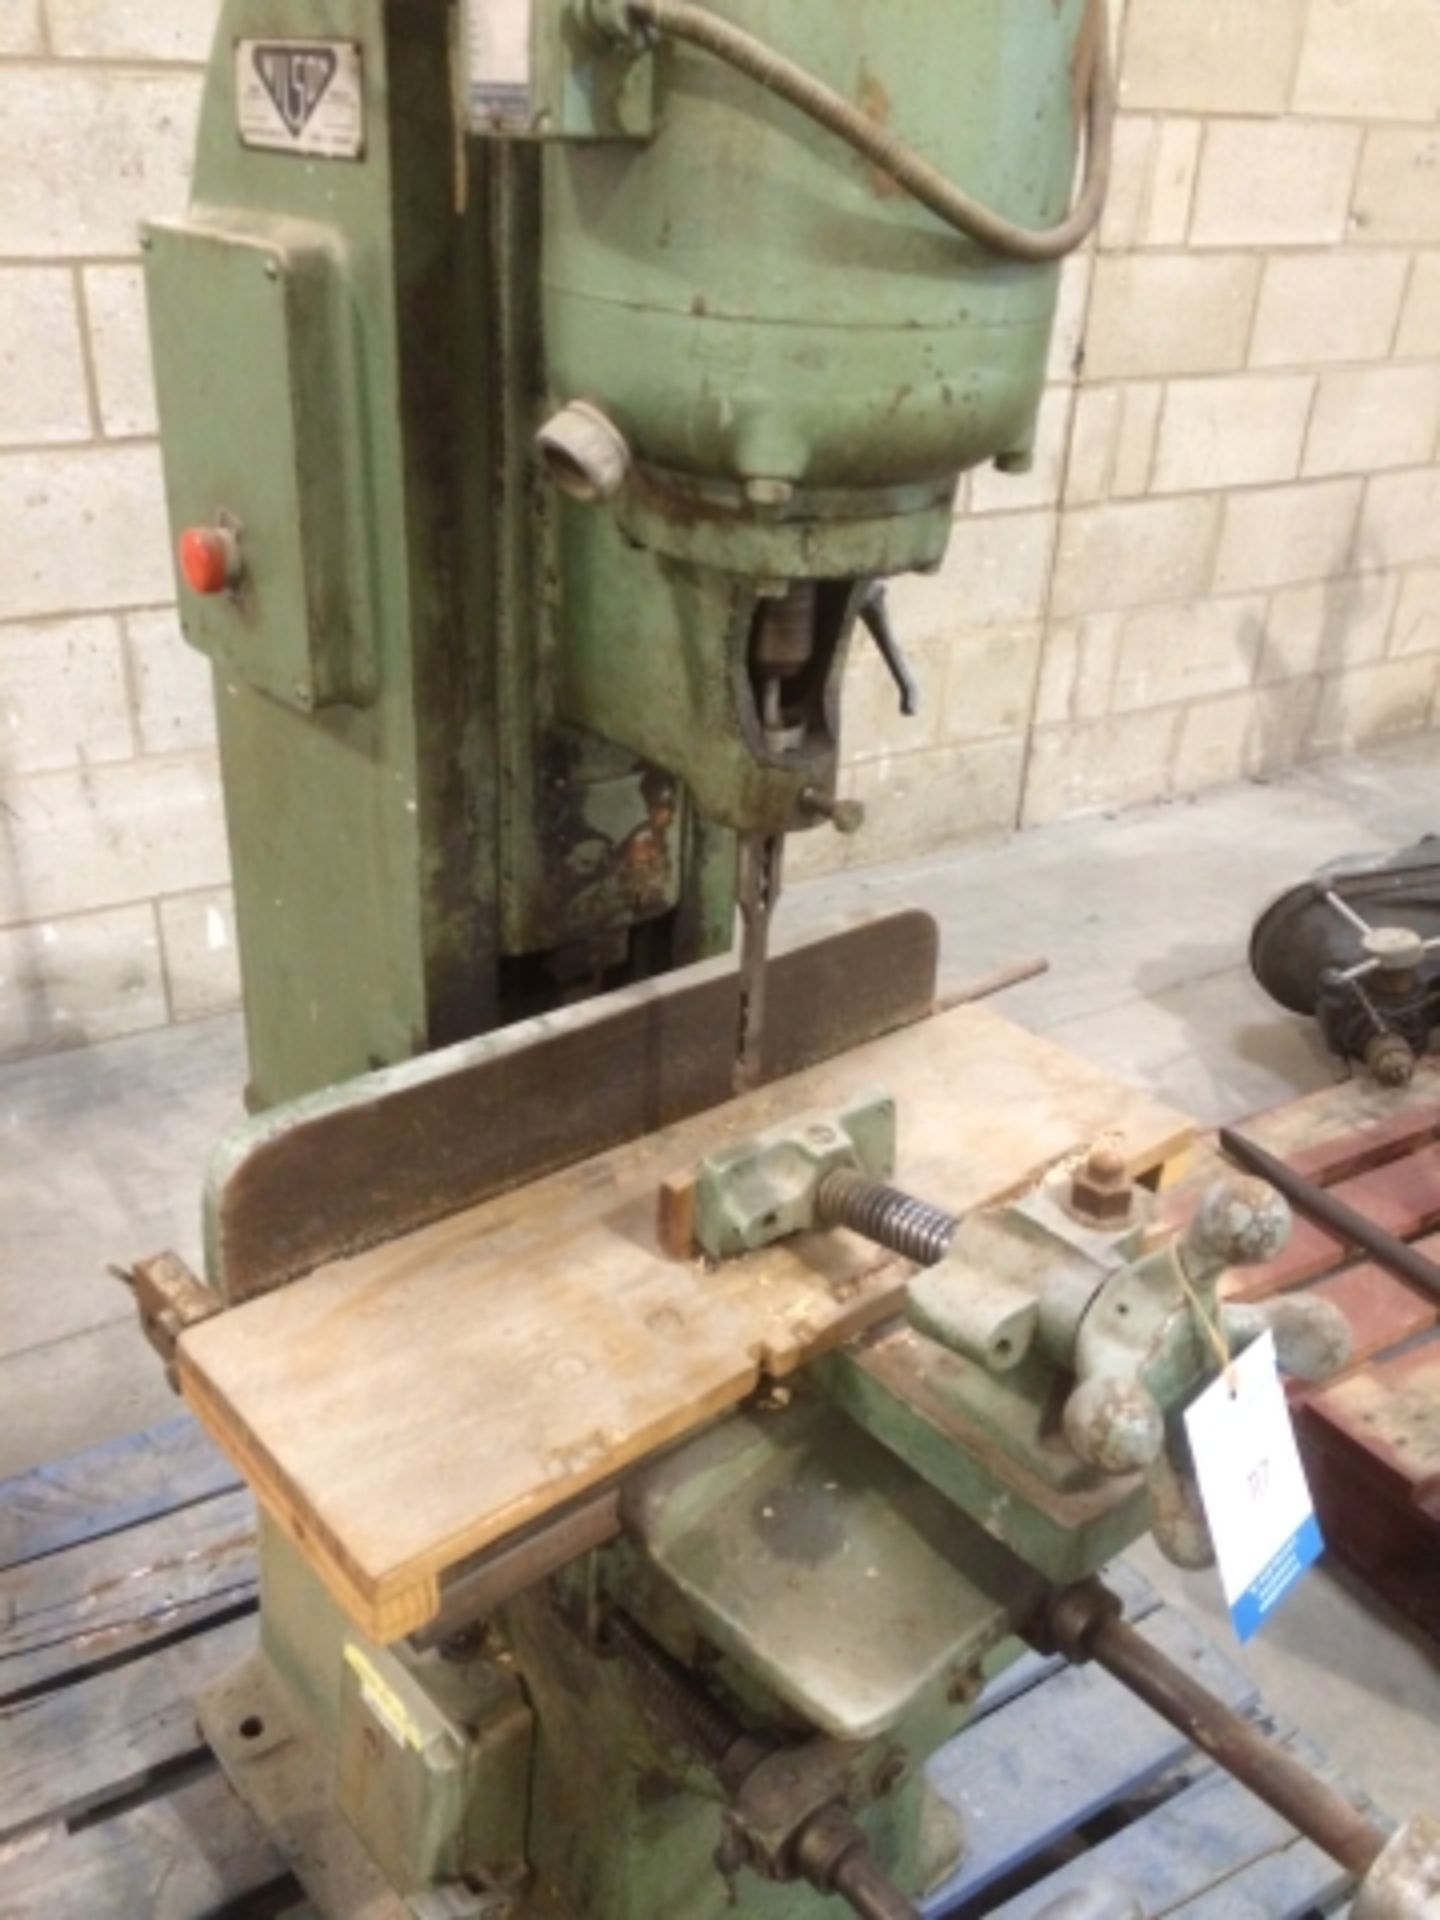 * Wilson HFE 5339 Chisel Morticer and a Pedestal Drill. This lot is located at the former North - Image 2 of 4